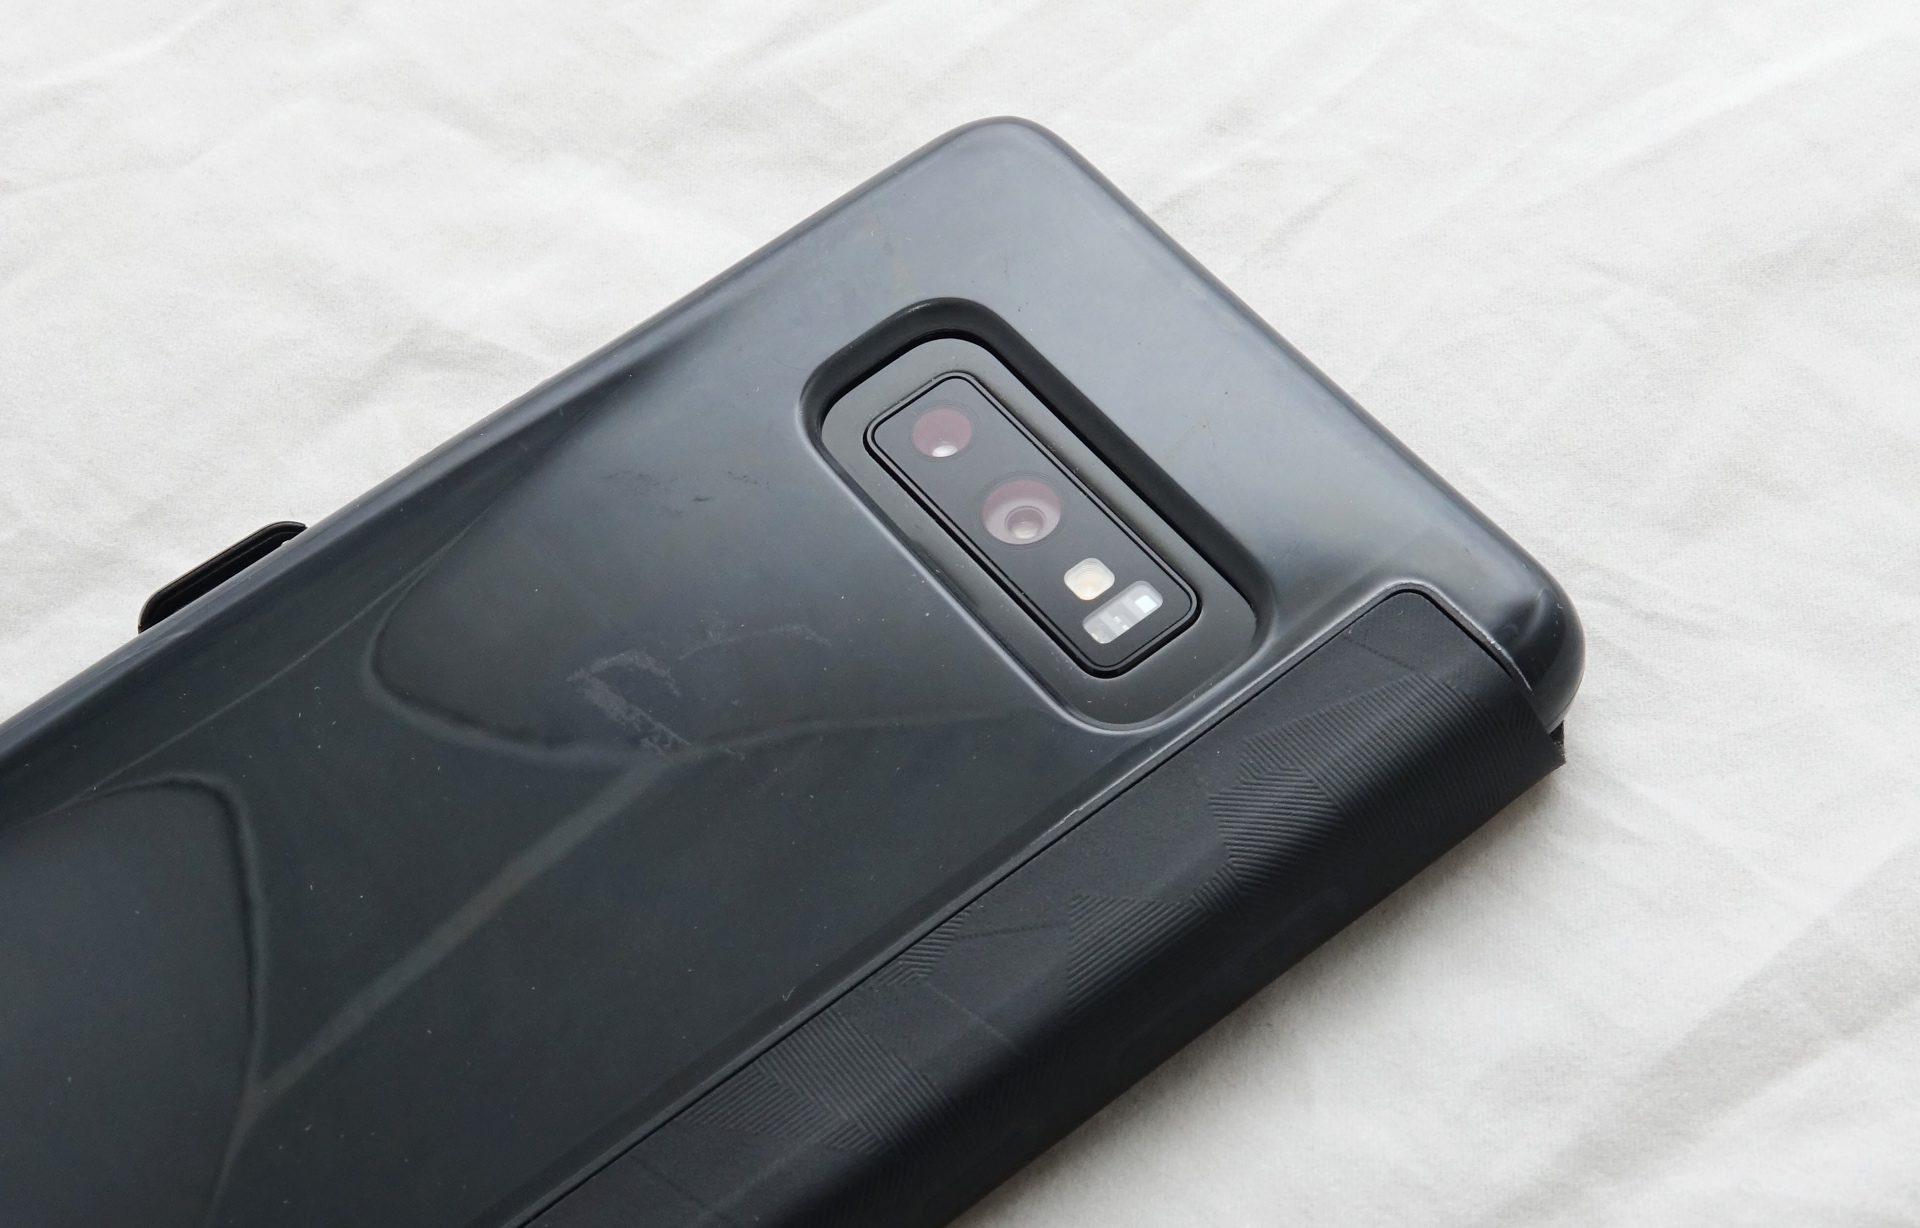 Samsung's Galaxy Note 9 with a Galaxy Note 8 case